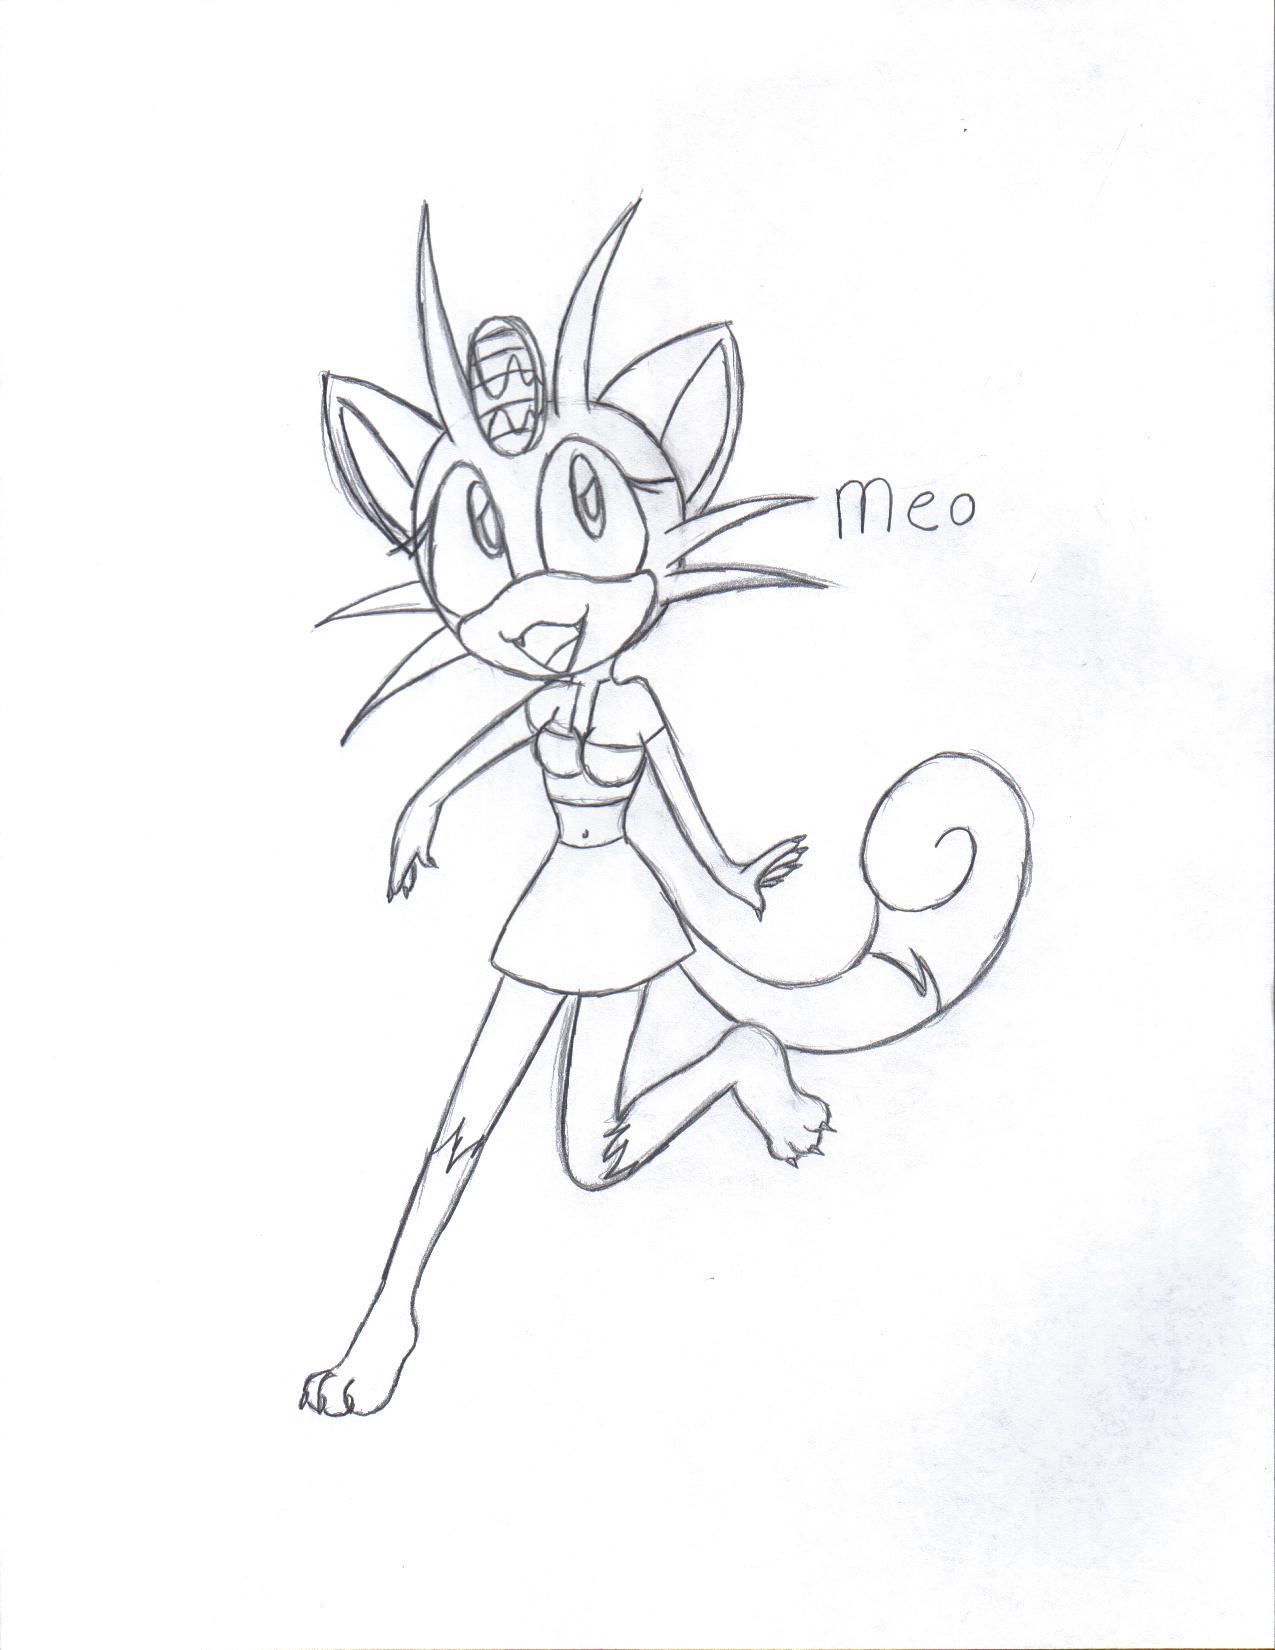 Meo the meowth in Sonic style by GemWist